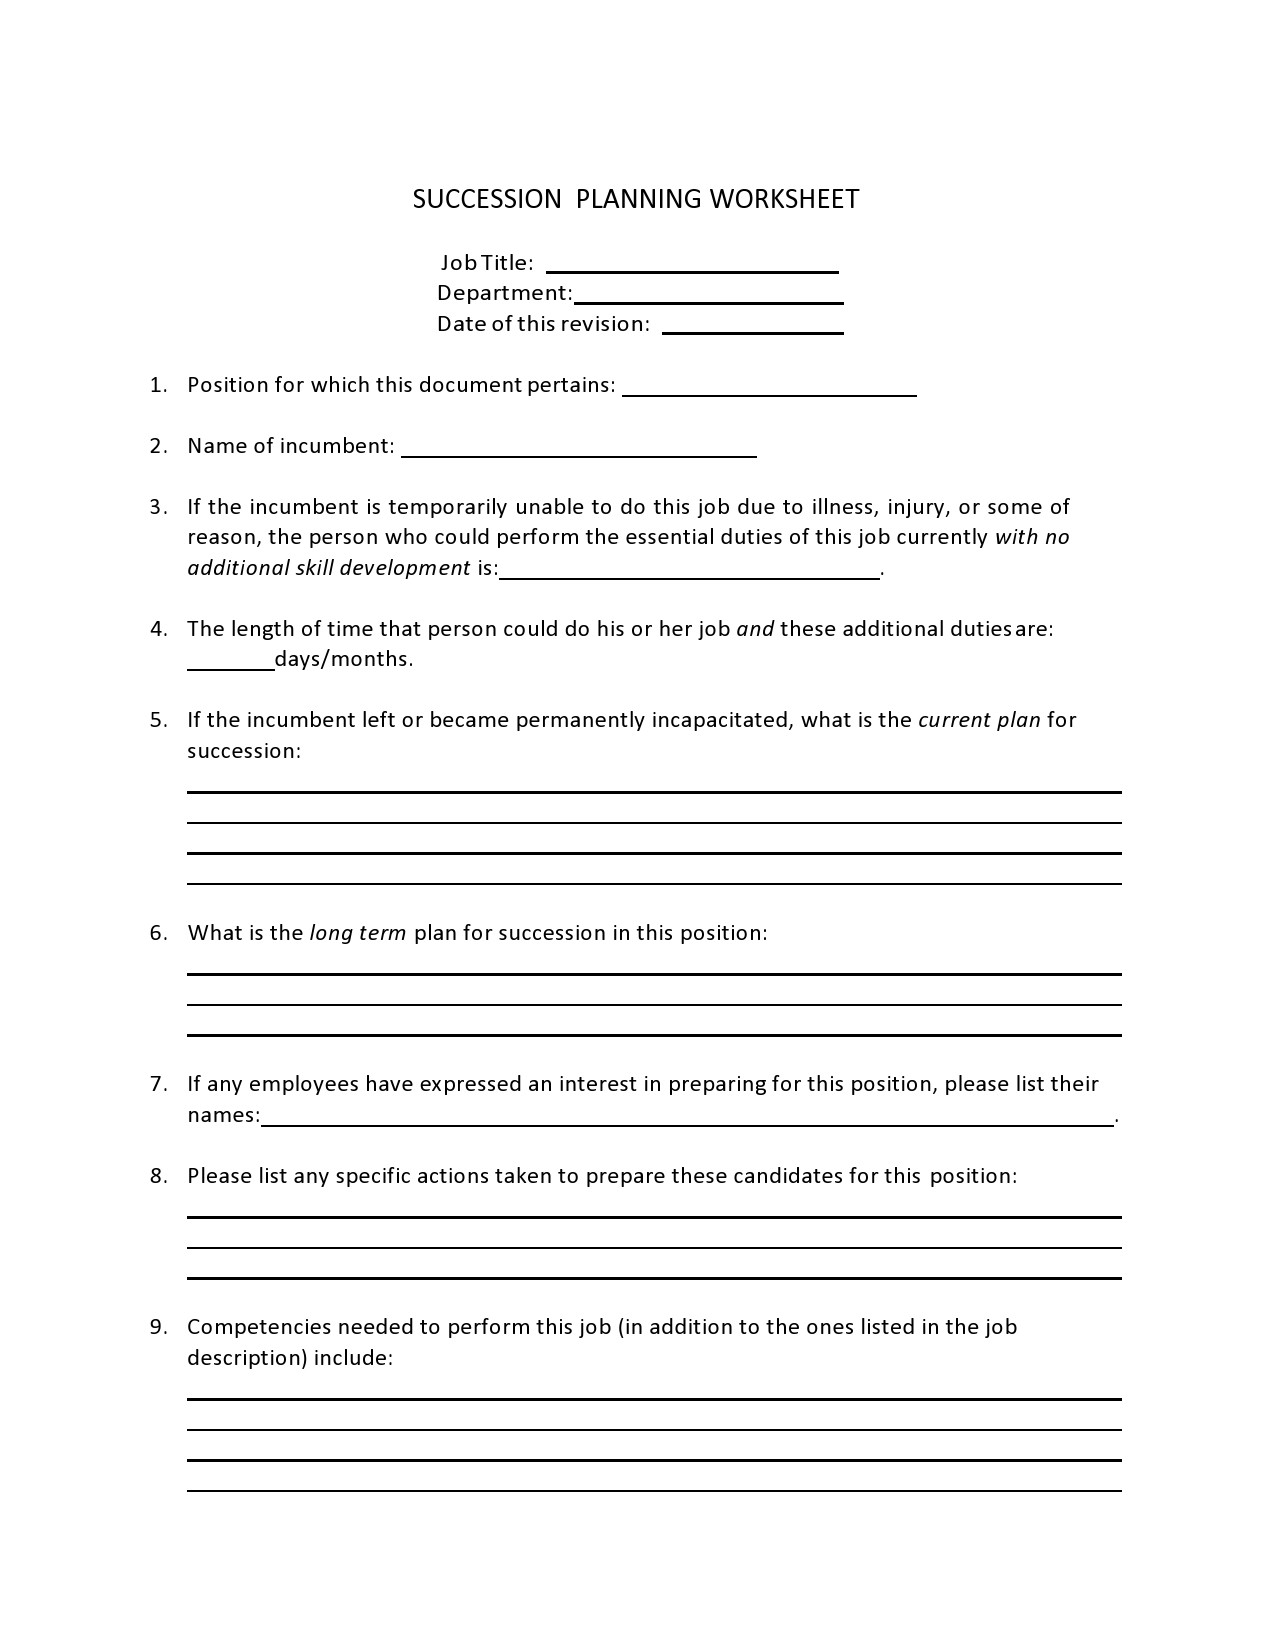 Free succession planning template 24